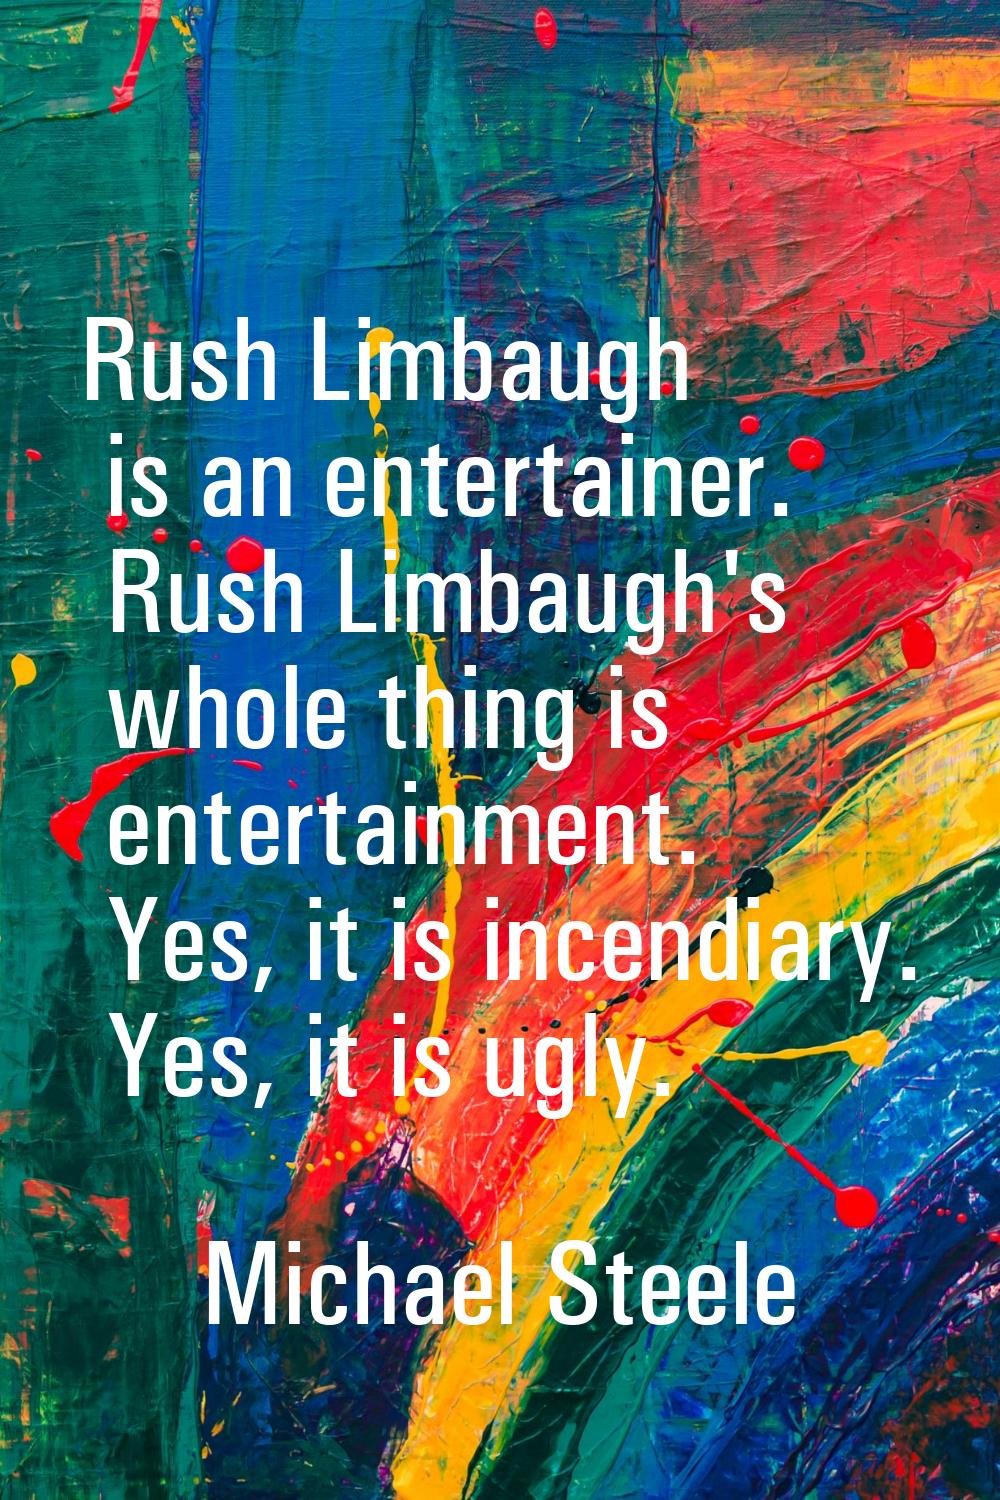 Rush Limbaugh is an entertainer. Rush Limbaugh's whole thing is entertainment. Yes, it is incendiar